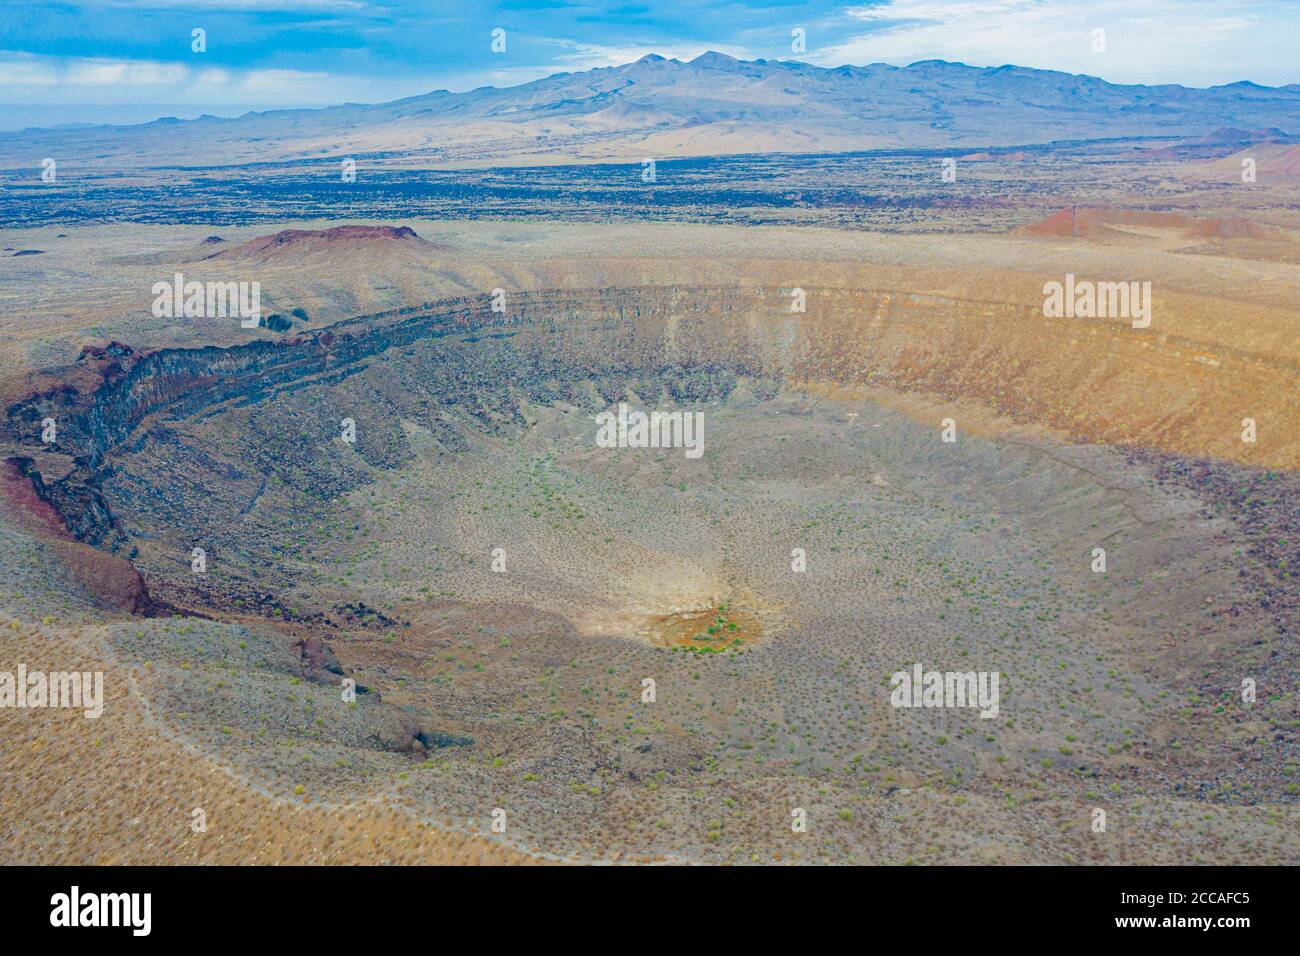 Aerial view of the maar-type volcanic crater El Elegant in the mountains of the El Pinacate Biosphere Reserve and the great Altar desert in Sonora, Mexico. Heritage of humanity by unesco. Typical desert ecosystem in Arizona just a few miles from the site. The volcano is the largest of an extensive chain of volcanic cones and craters, 250 meters deep and 1,500 meters in diameter (Photo by Luis Gutierrez / Norte Photo)   Vista aerea del cráter volcánico tipo maar El Elegante en la sierra de la Reserva de la Biosfera El Pinacate y gran desierto de Altar en Sonora, Mexico. Patrimonio de la Humanid Stock Photo